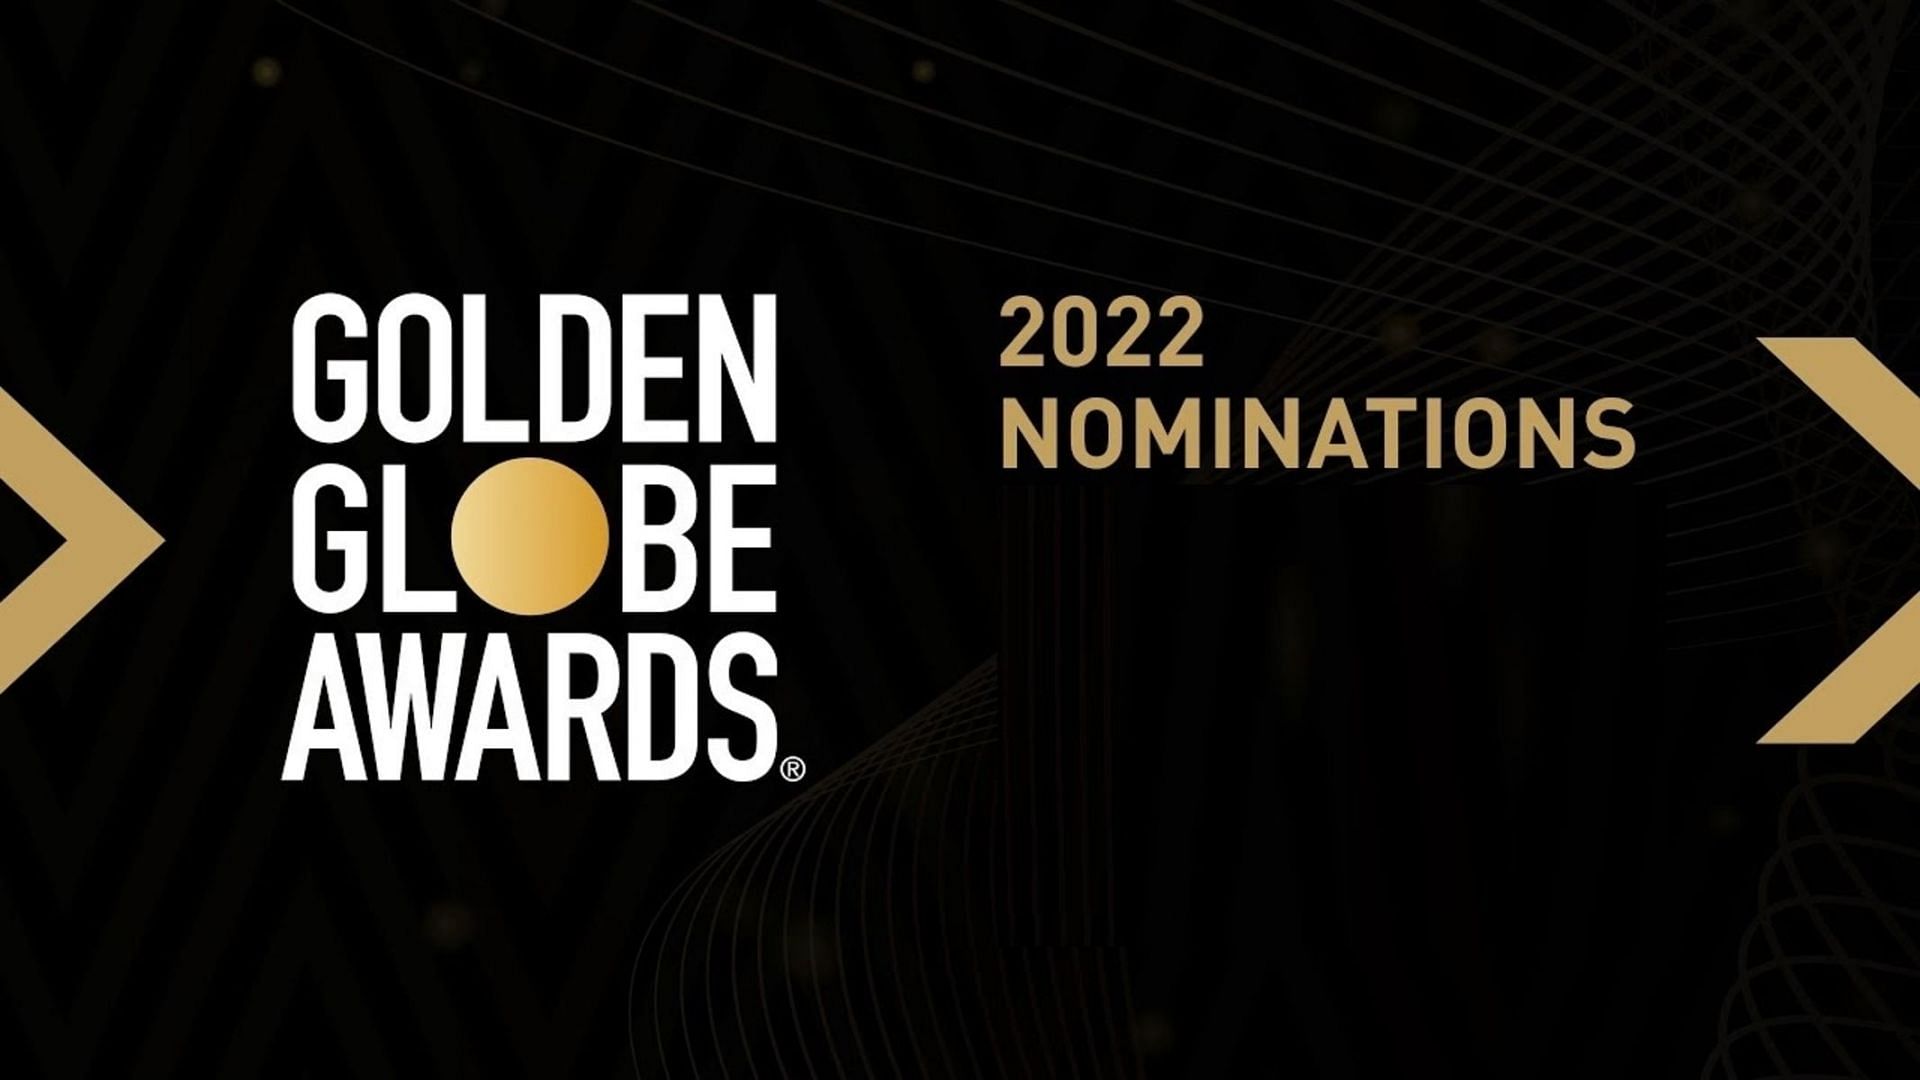 79th annual Golden Globe Awards nominations (Image via GoldenGlobe/YouTube)